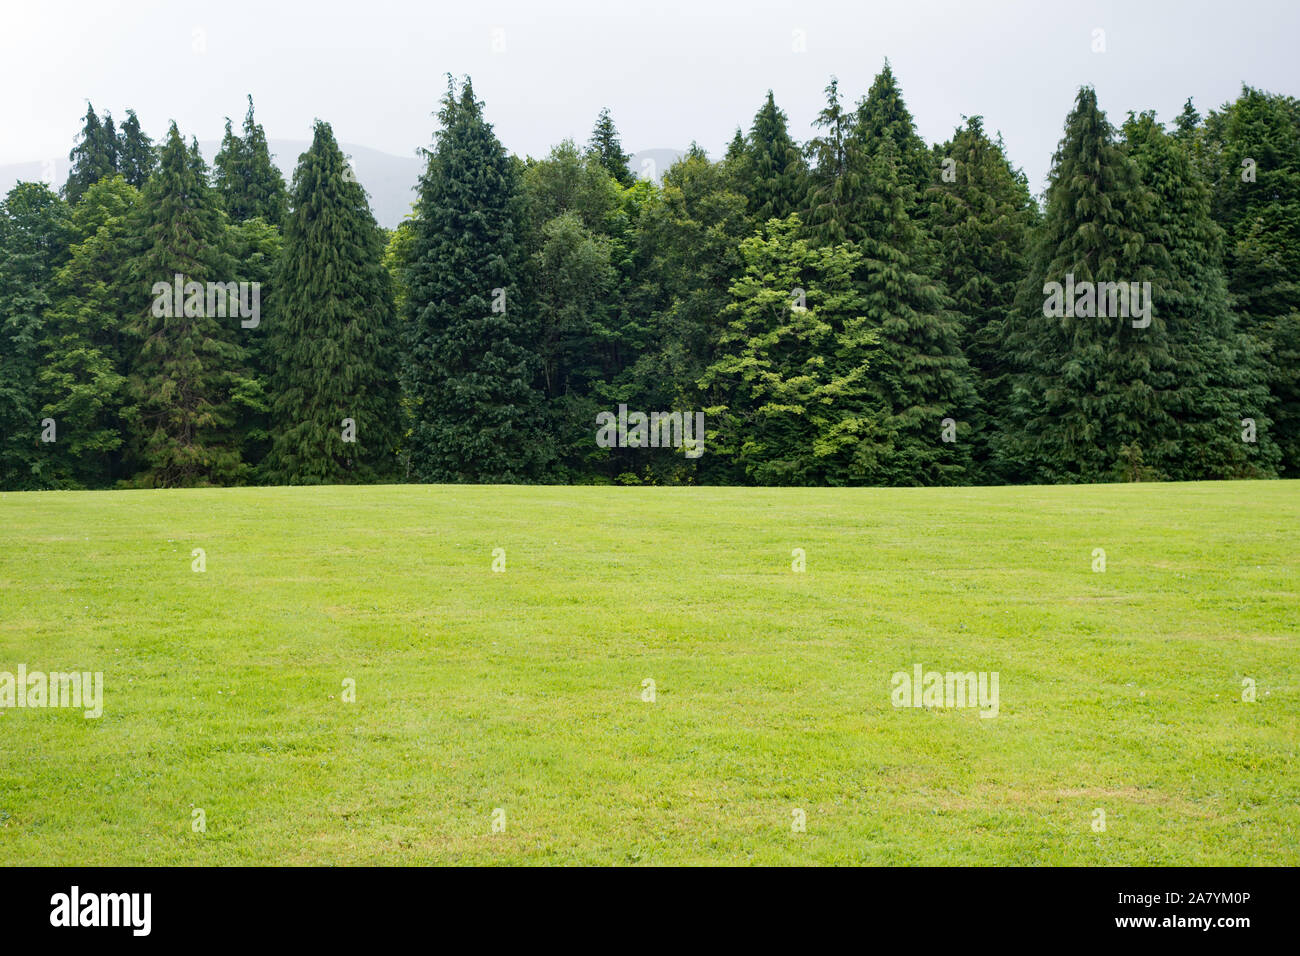 A line of fir trees at Killarney National Park in Co. Kerry Ireland Stock Photo